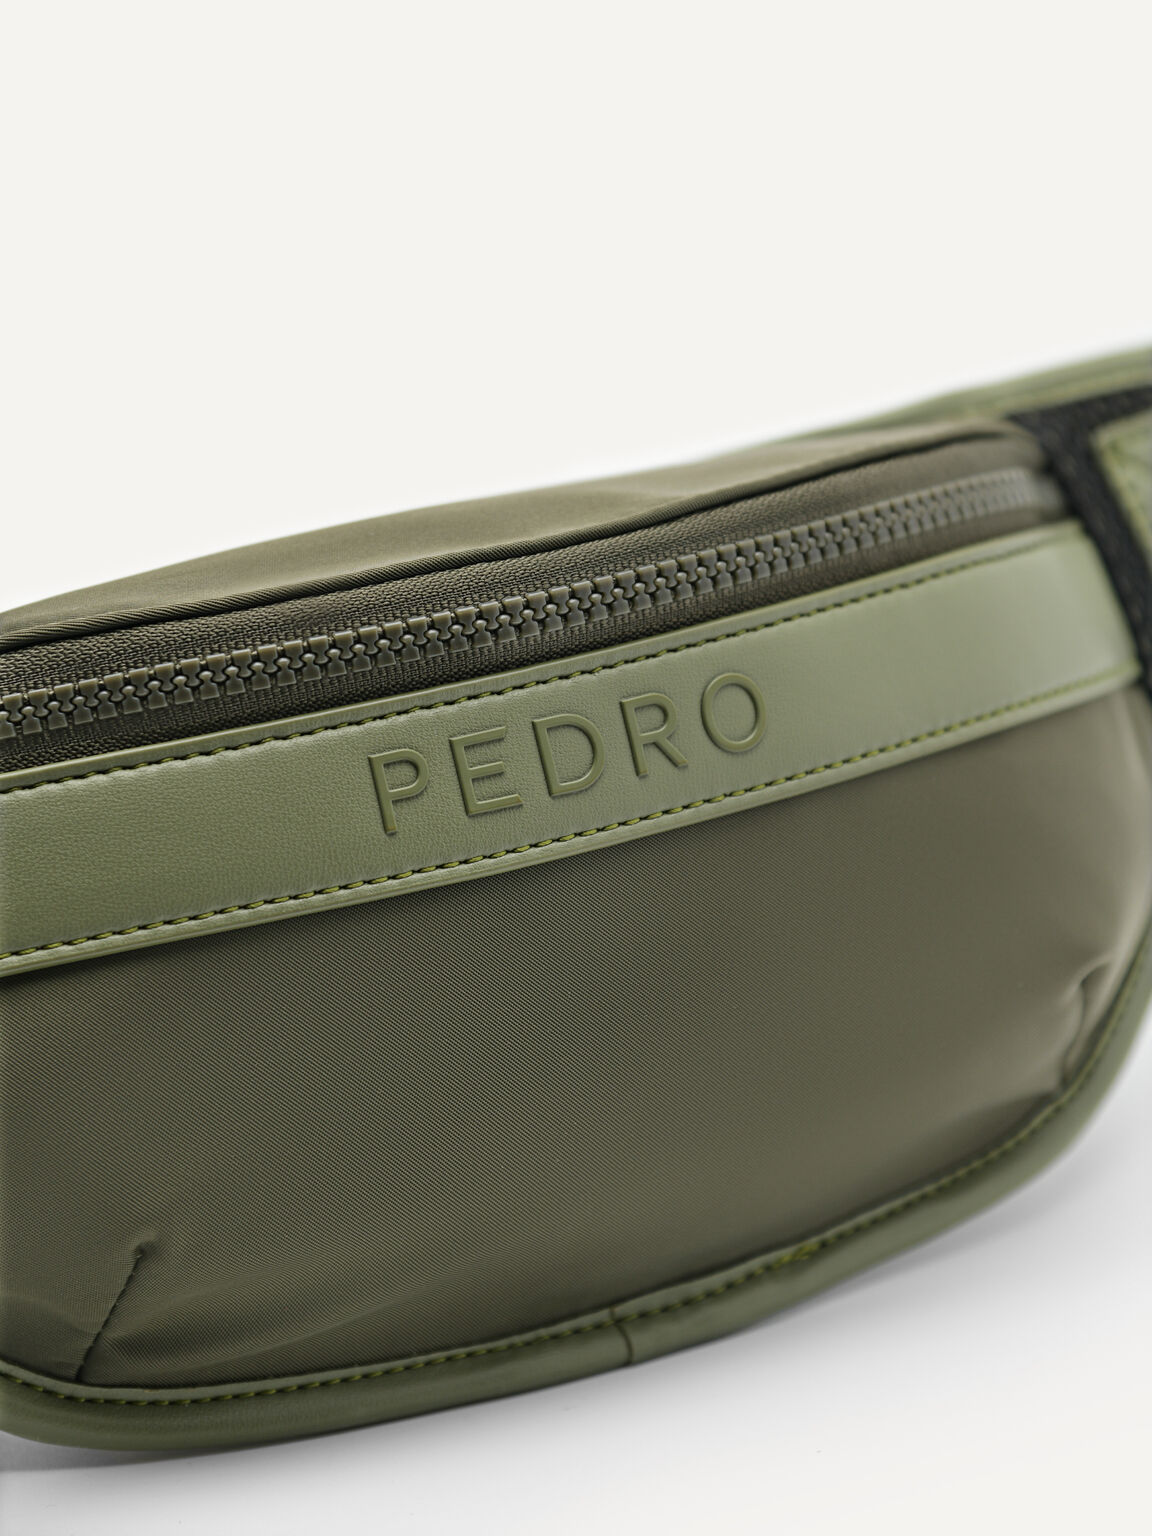 Trail Sling Pouch, Military Green